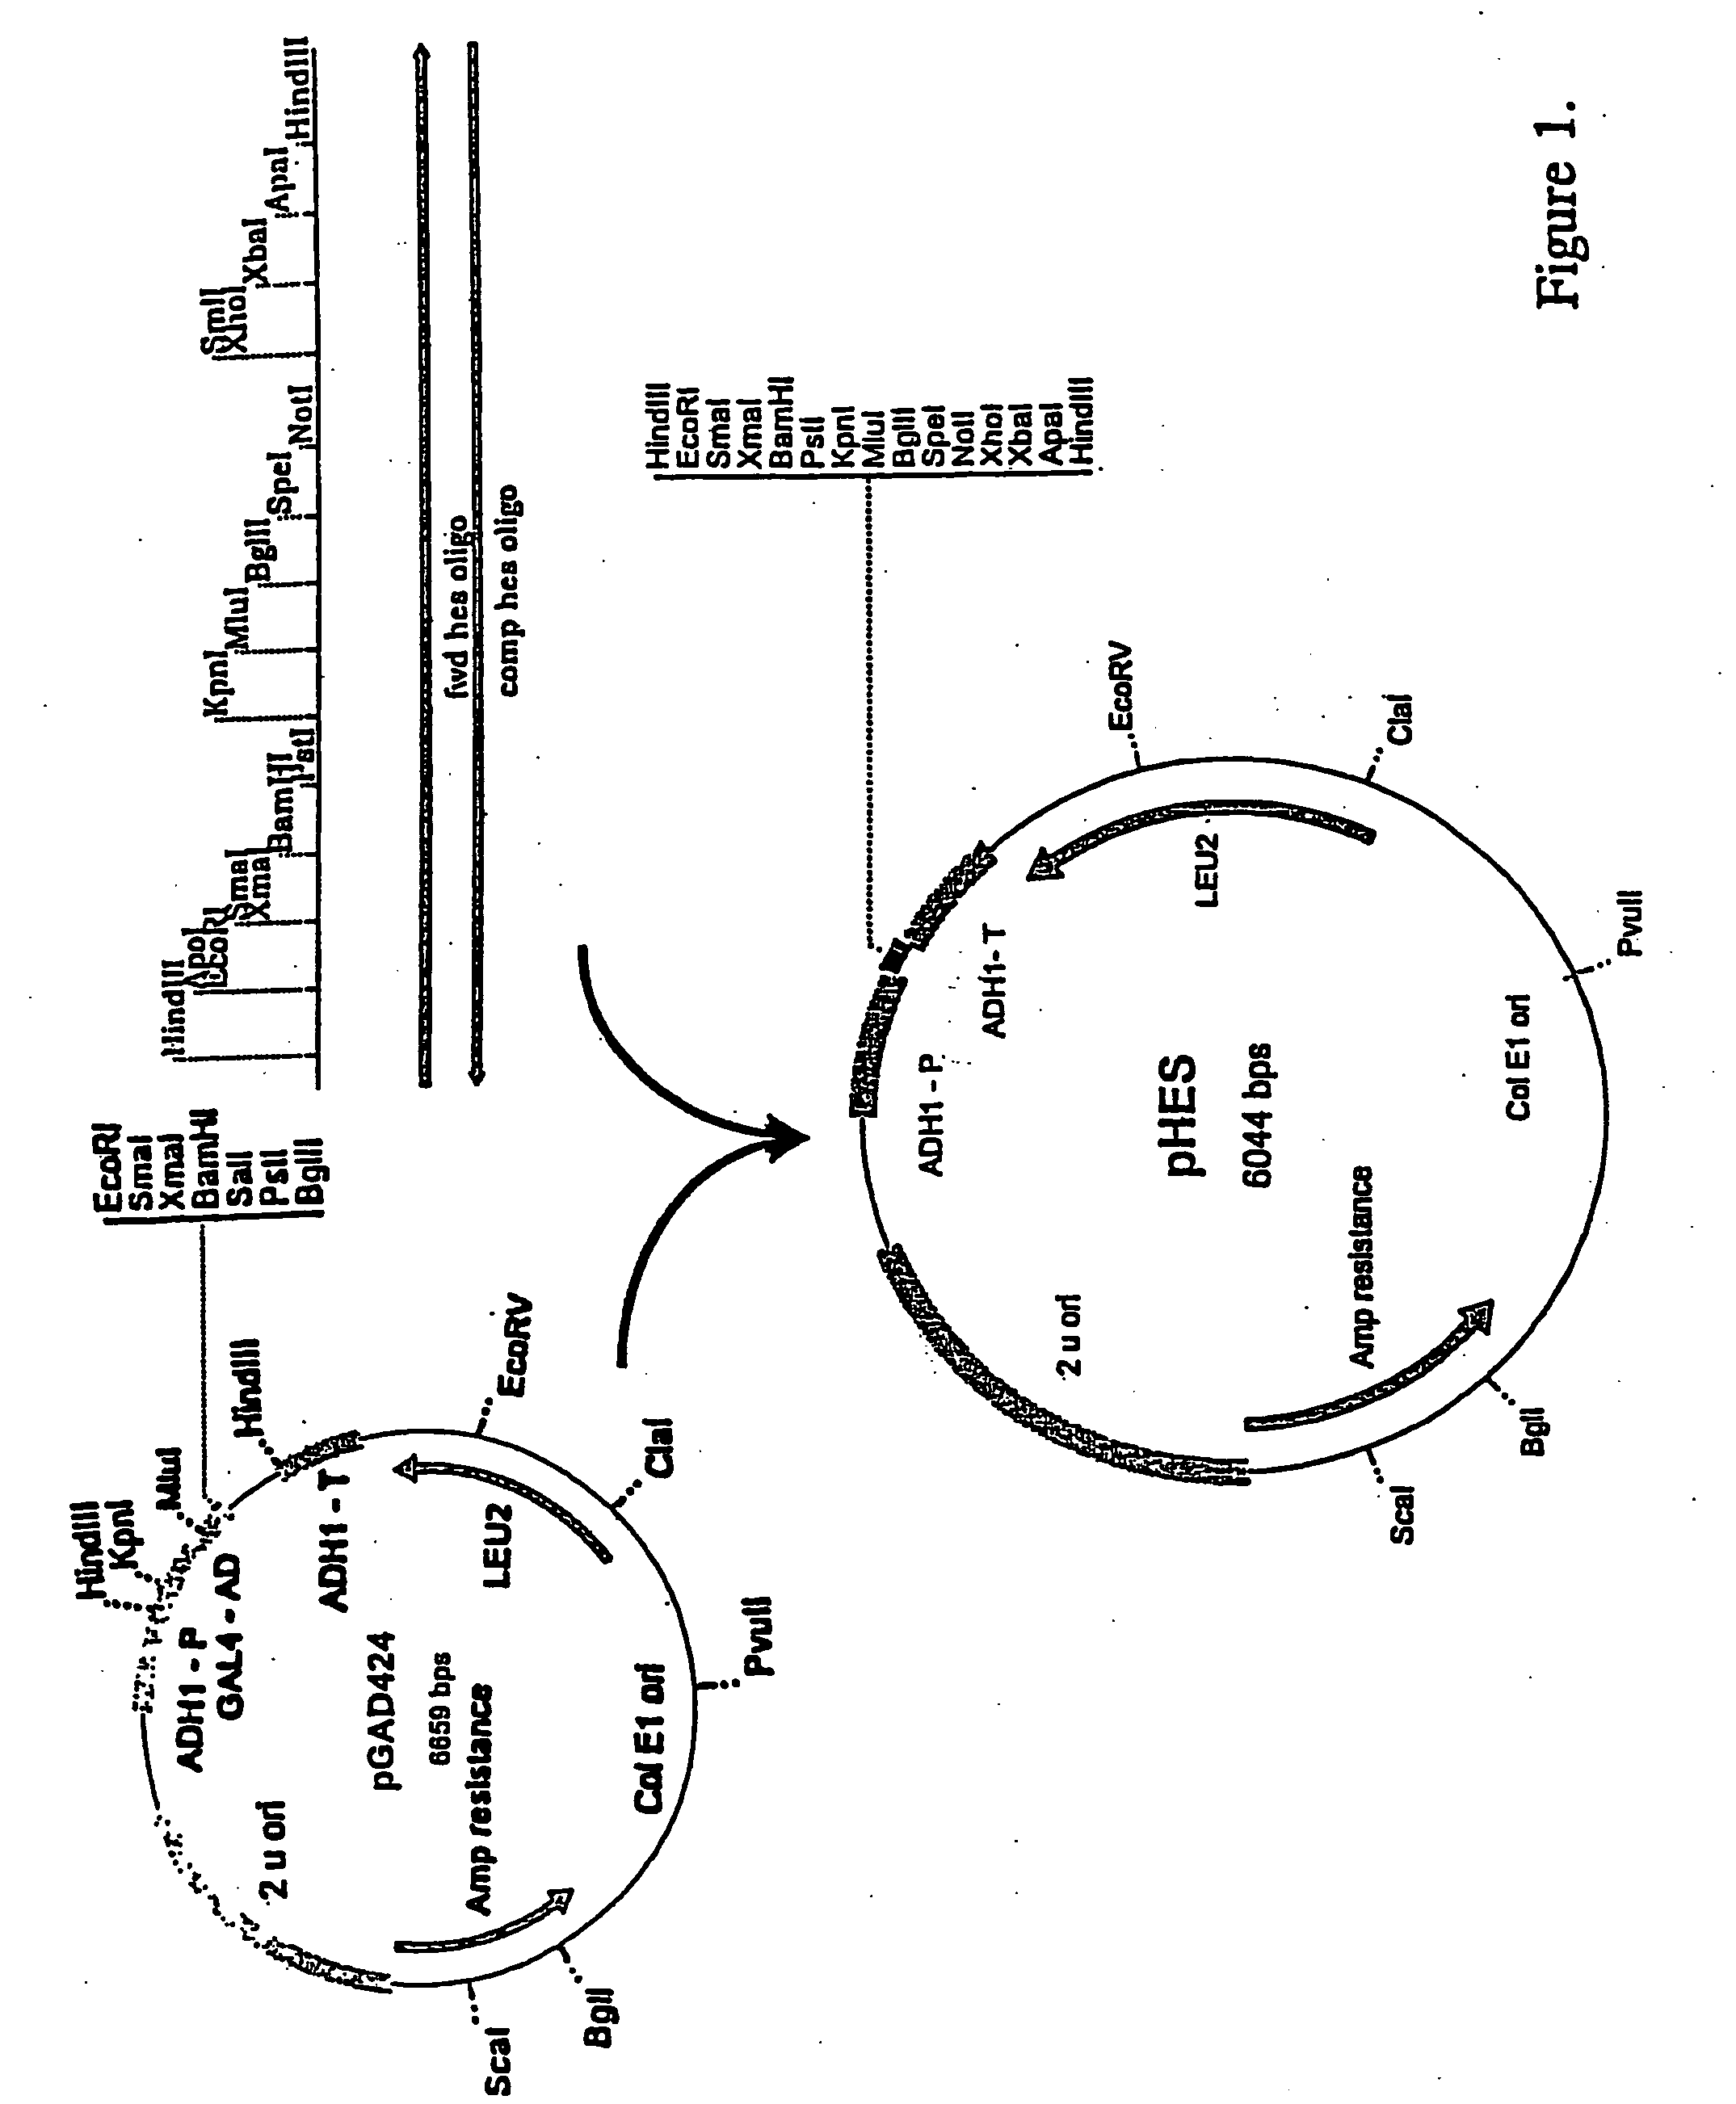 Methods and materials for the synthesis of organic products